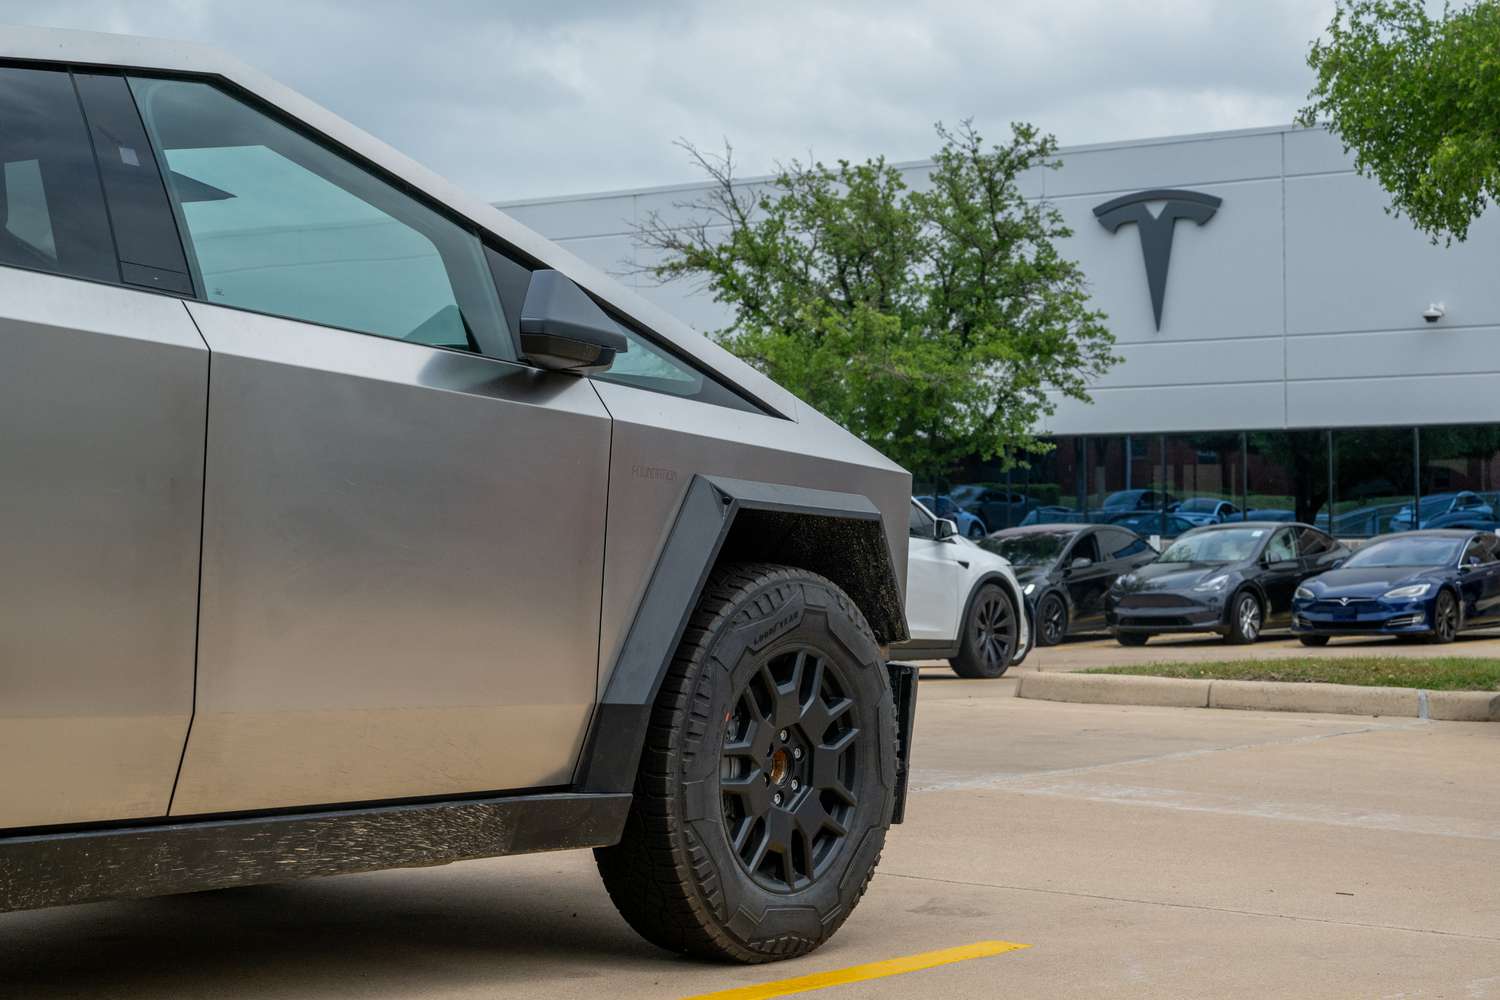 How Soap Likely Made Tesla Recall Almost 4,000 Cybertrucks [Video]